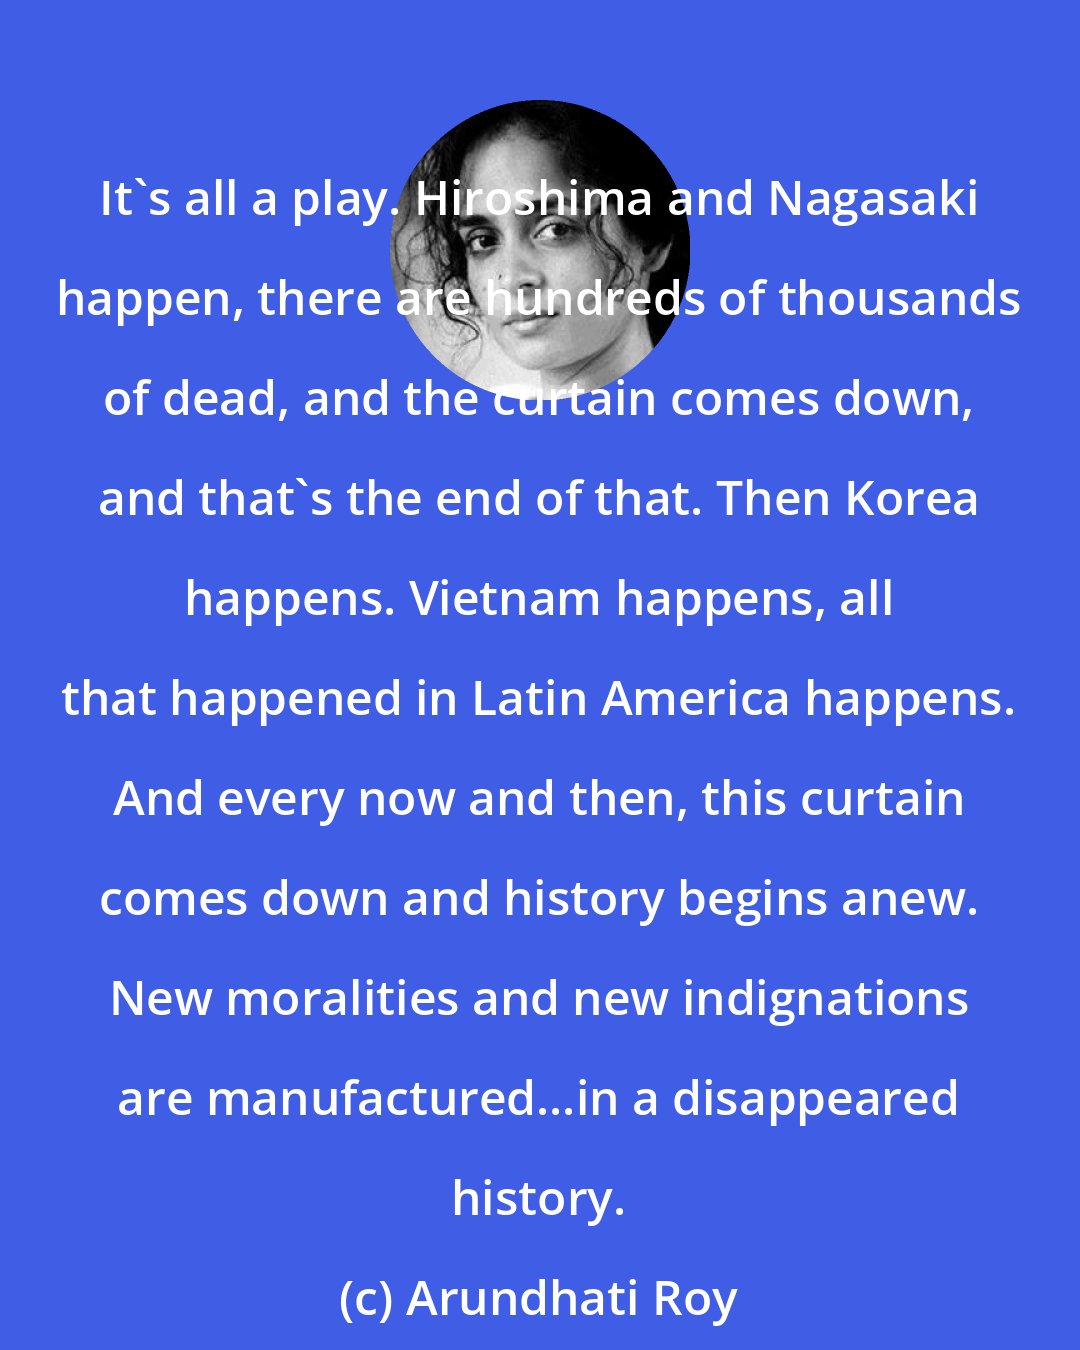 Arundhati Roy: It's all a play. Hiroshima and Nagasaki happen, there are hundreds of thousands of dead, and the curtain comes down, and that's the end of that. Then Korea happens. Vietnam happens, all that happened in Latin America happens. And every now and then, this curtain comes down and history begins anew. New moralities and new indignations are manufactured...in a disappeared history.